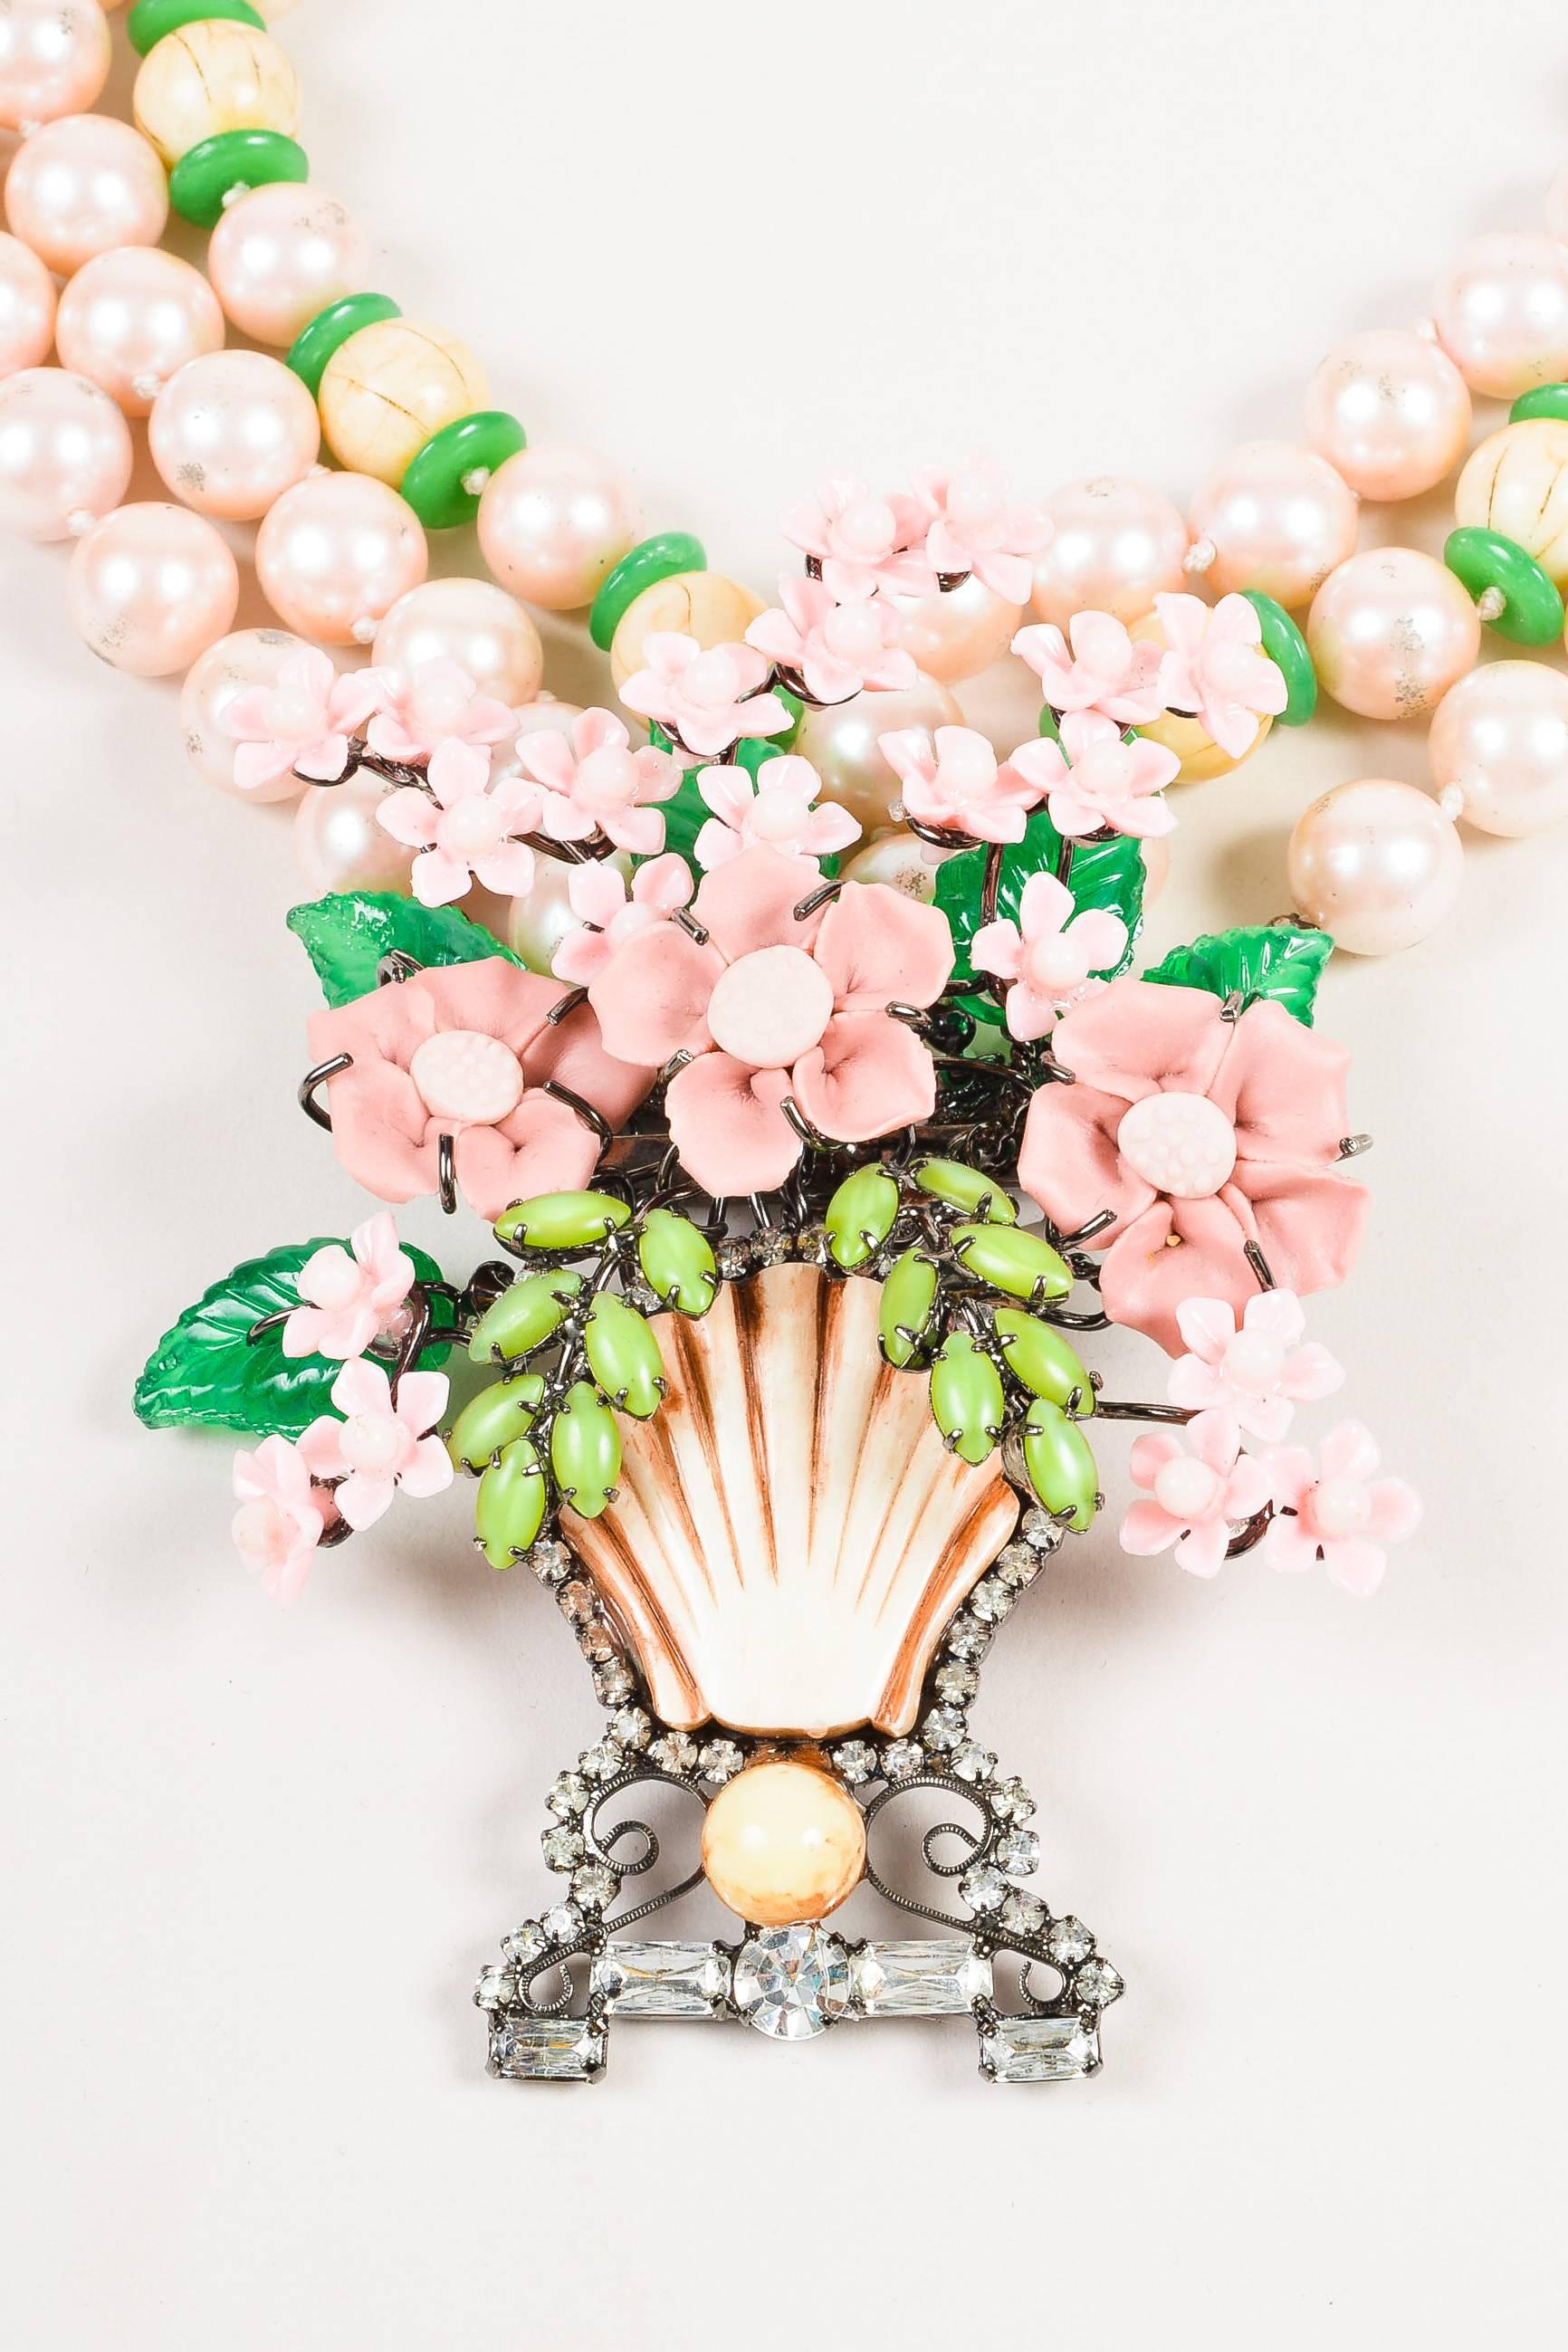 Large pale pink faux pearl strands are details with green and wooden beads. Flower basket pedant has a tan seashell and bead at center with rhinestone trim. Pink flowers at center have green leaves below and fanning the top. Hook closure in